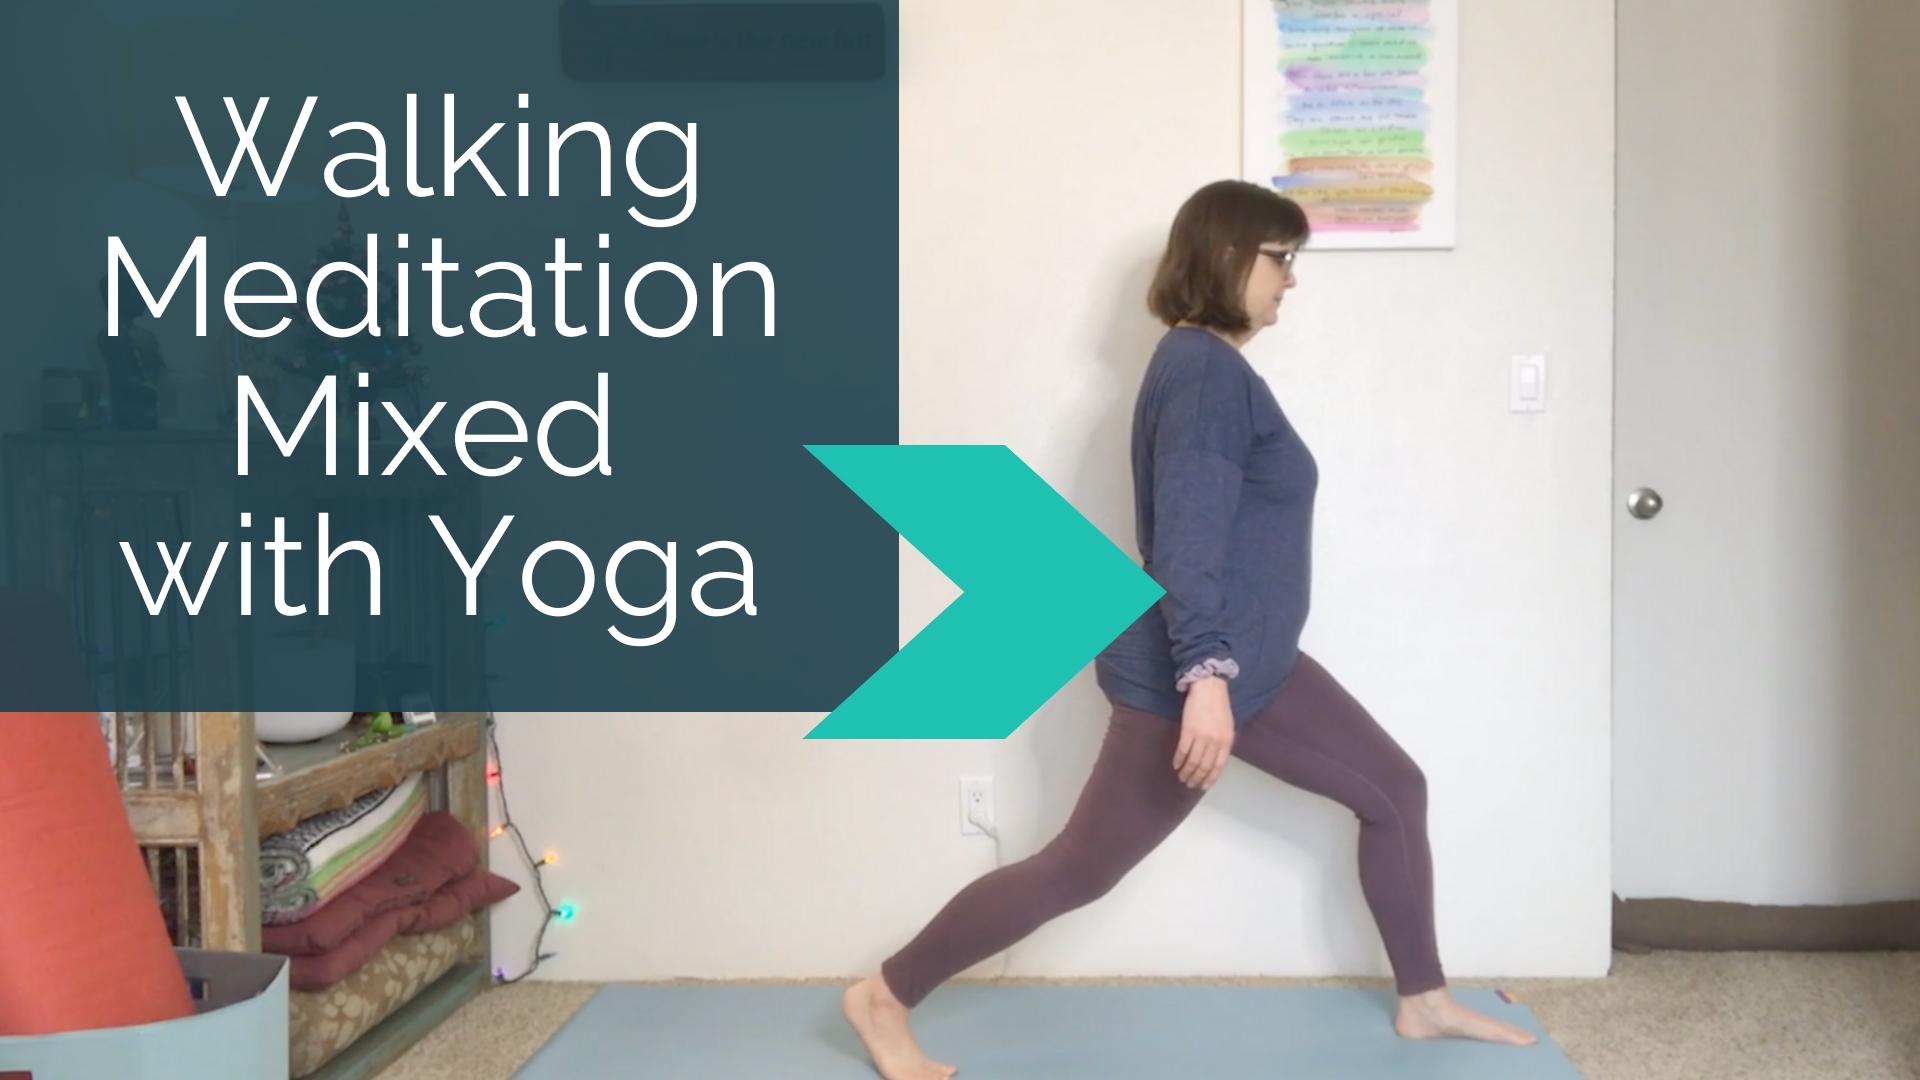 Try this free online class combining mindful walking meditation with yoga.